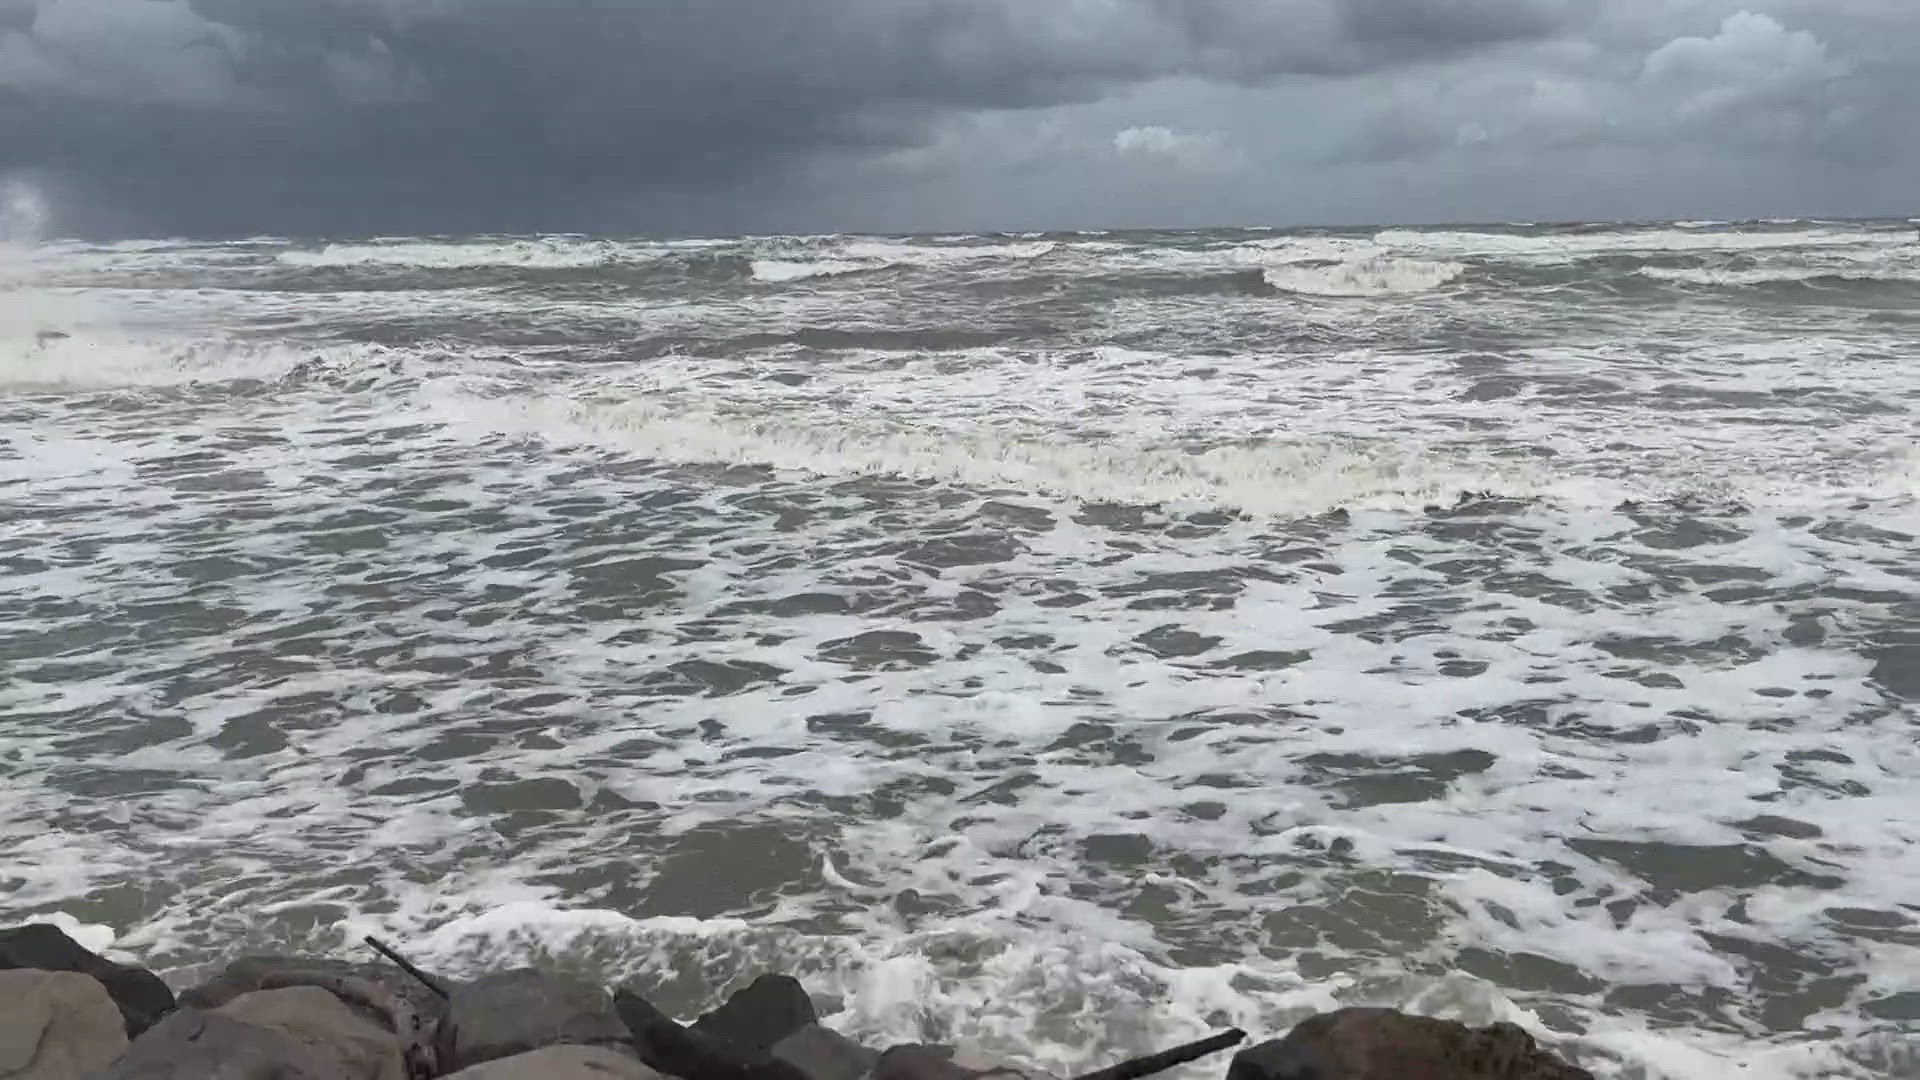 "No swimming" flags went up in Surfside Tuesday morning as waves crashed ashore.